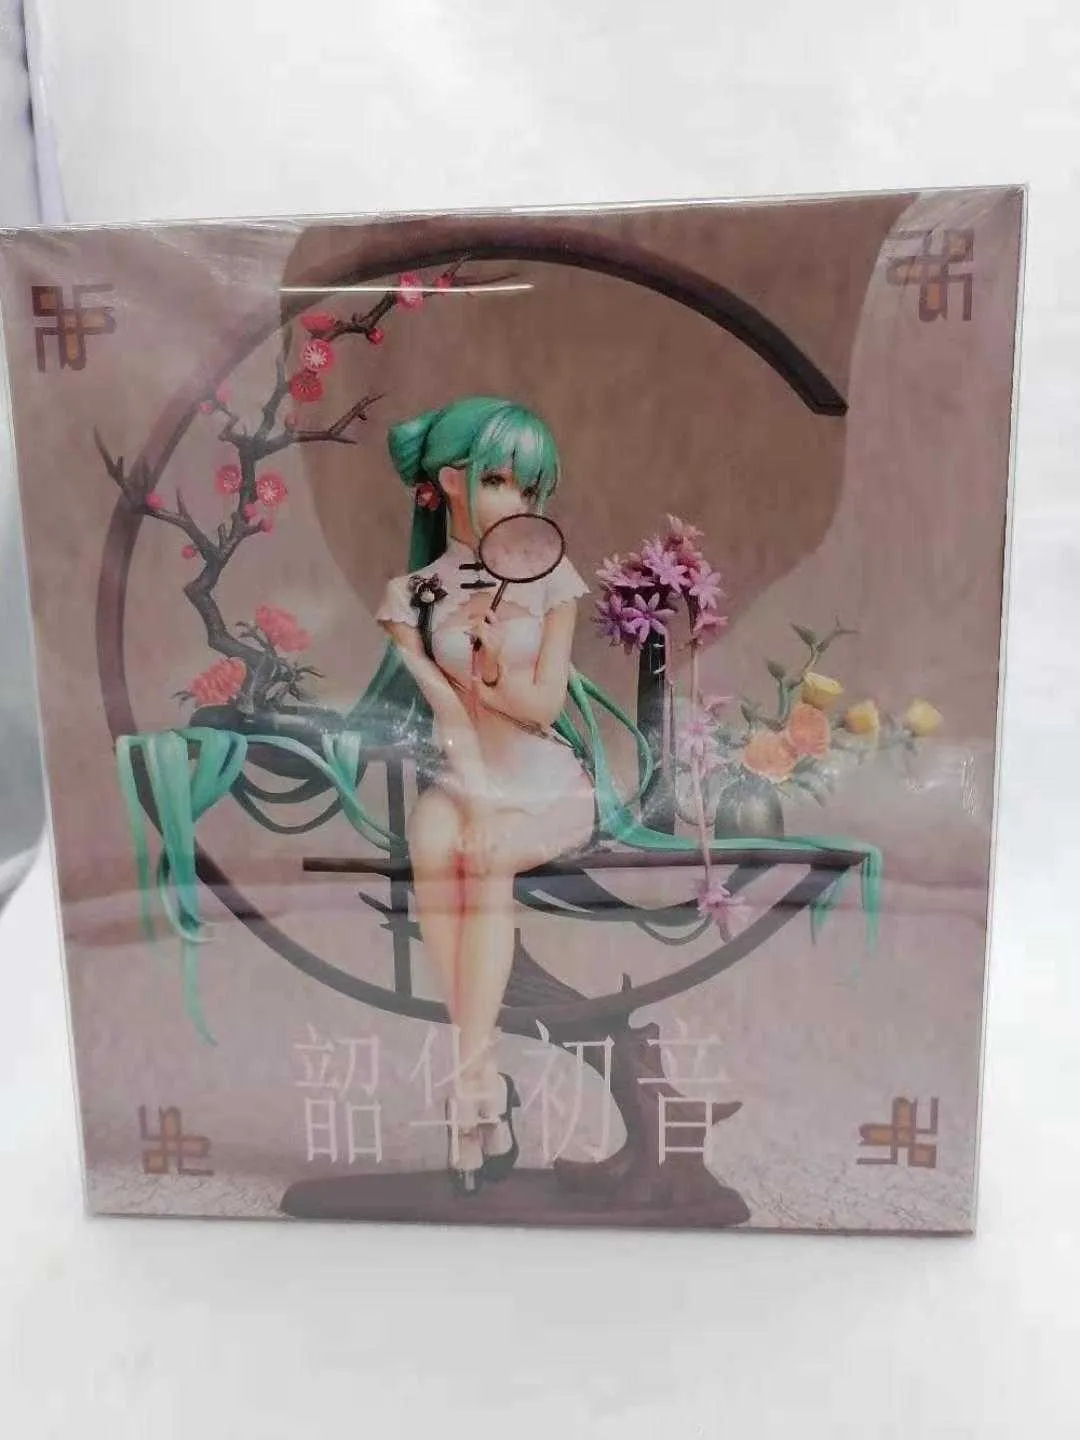 Anime VOCALOID Cheongsam Sexy Figures PVC Action Figure Toy Beauty Girl Adult Statue Collection Model Doll Gifts Figures Girls Car4211660